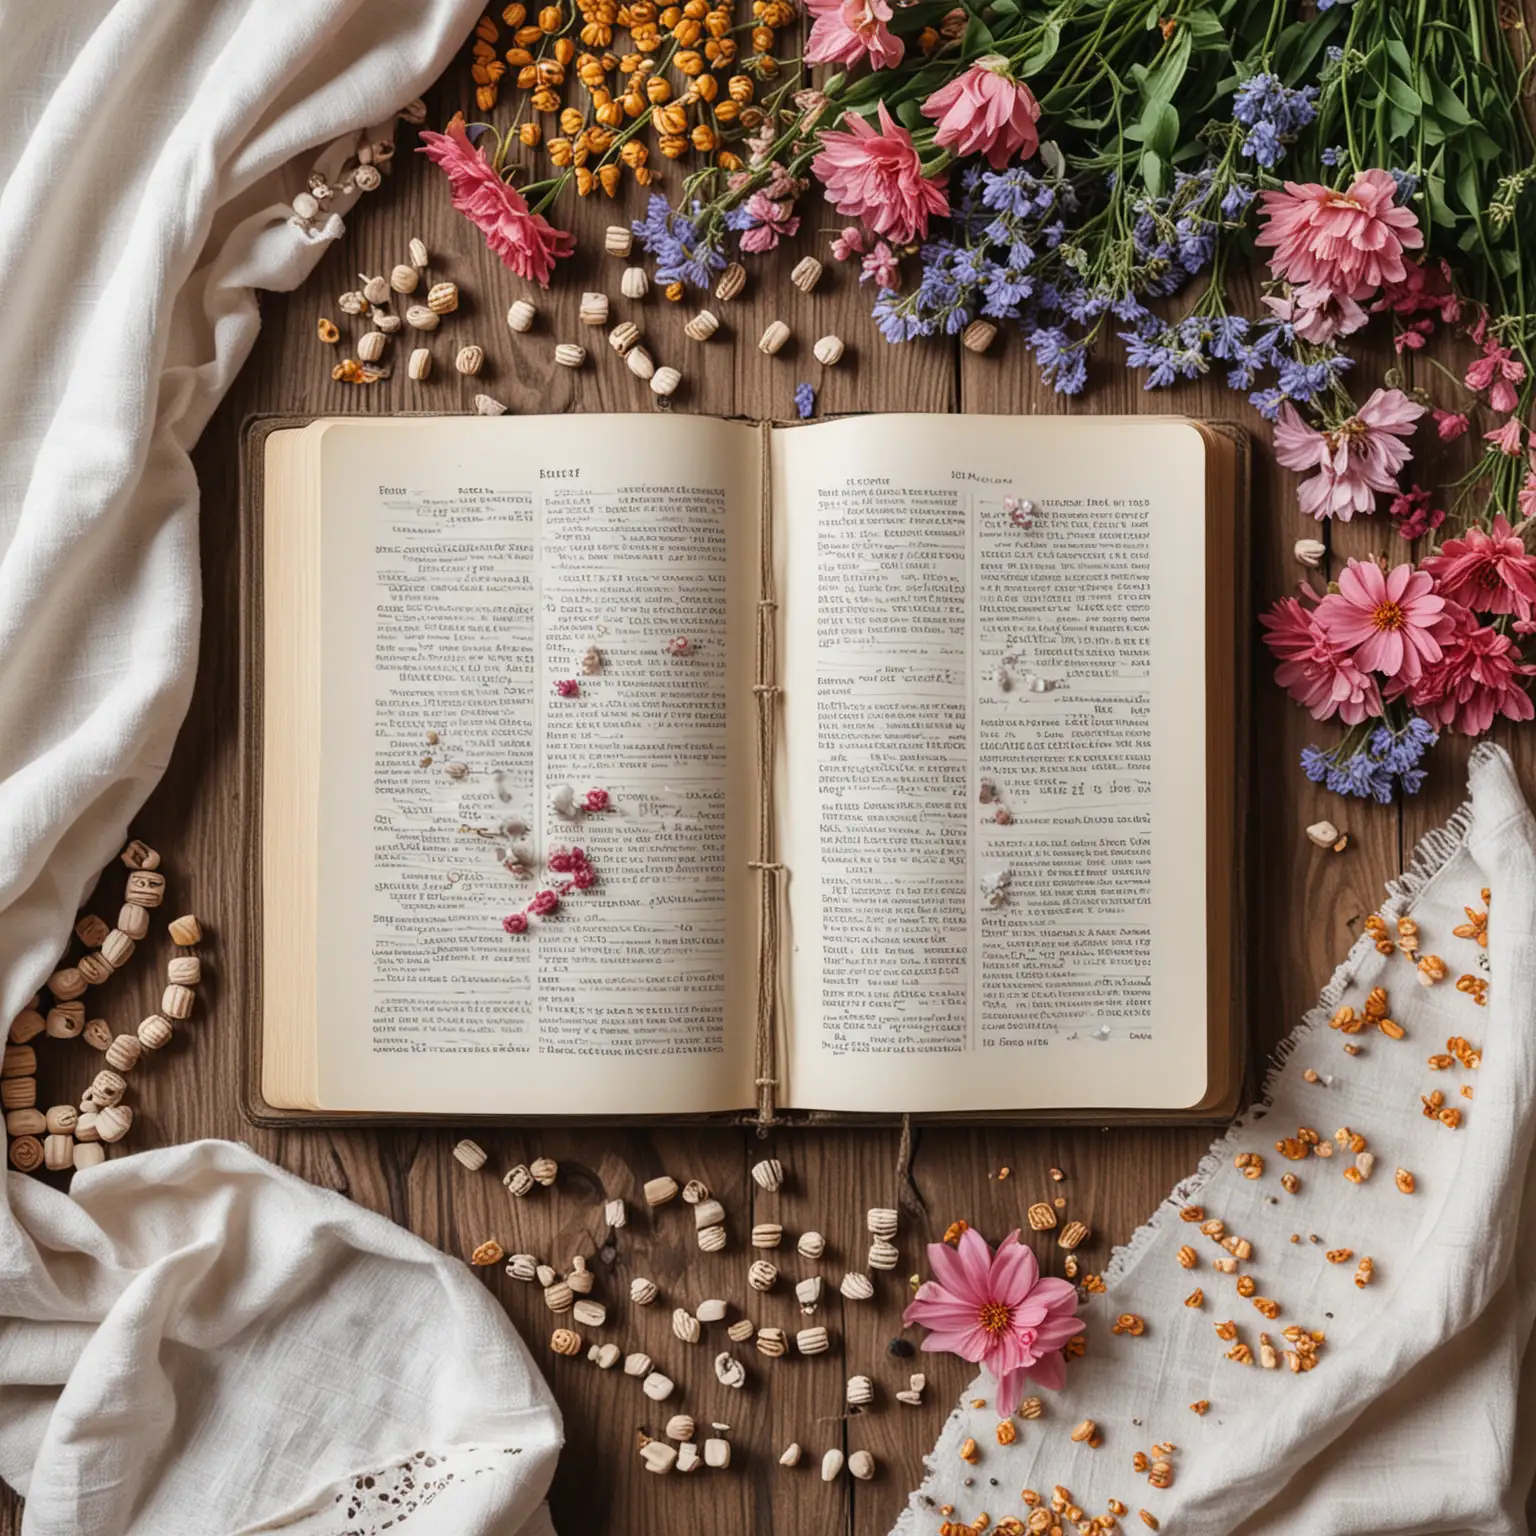 Flat lay, open book on a table surrounded by flowers, wooden beads